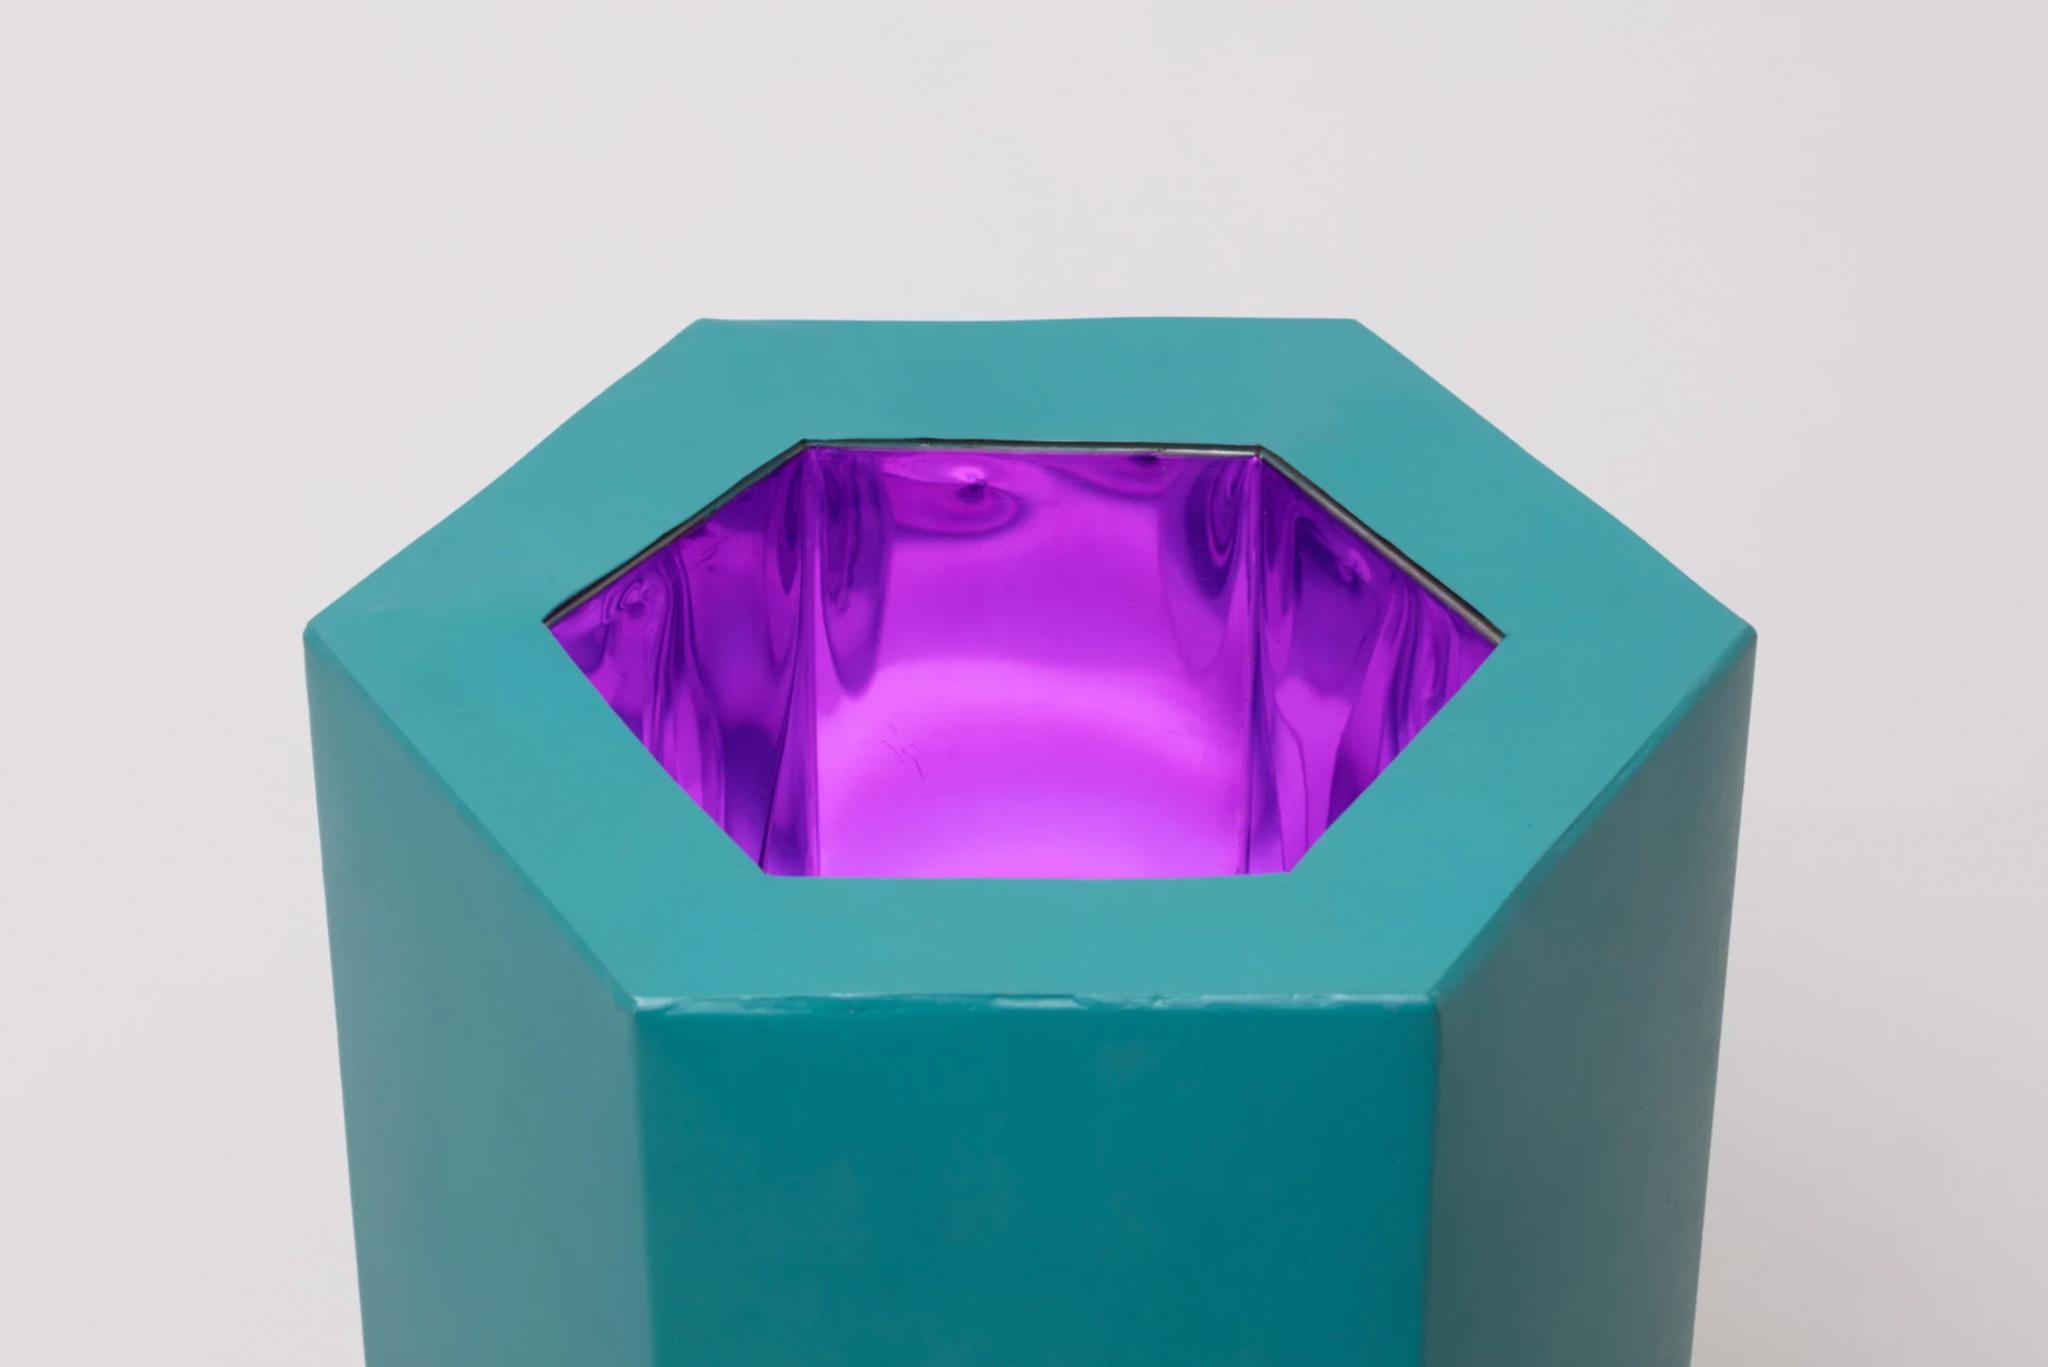 A sculpture by Robert Smithson with a glowing purple center